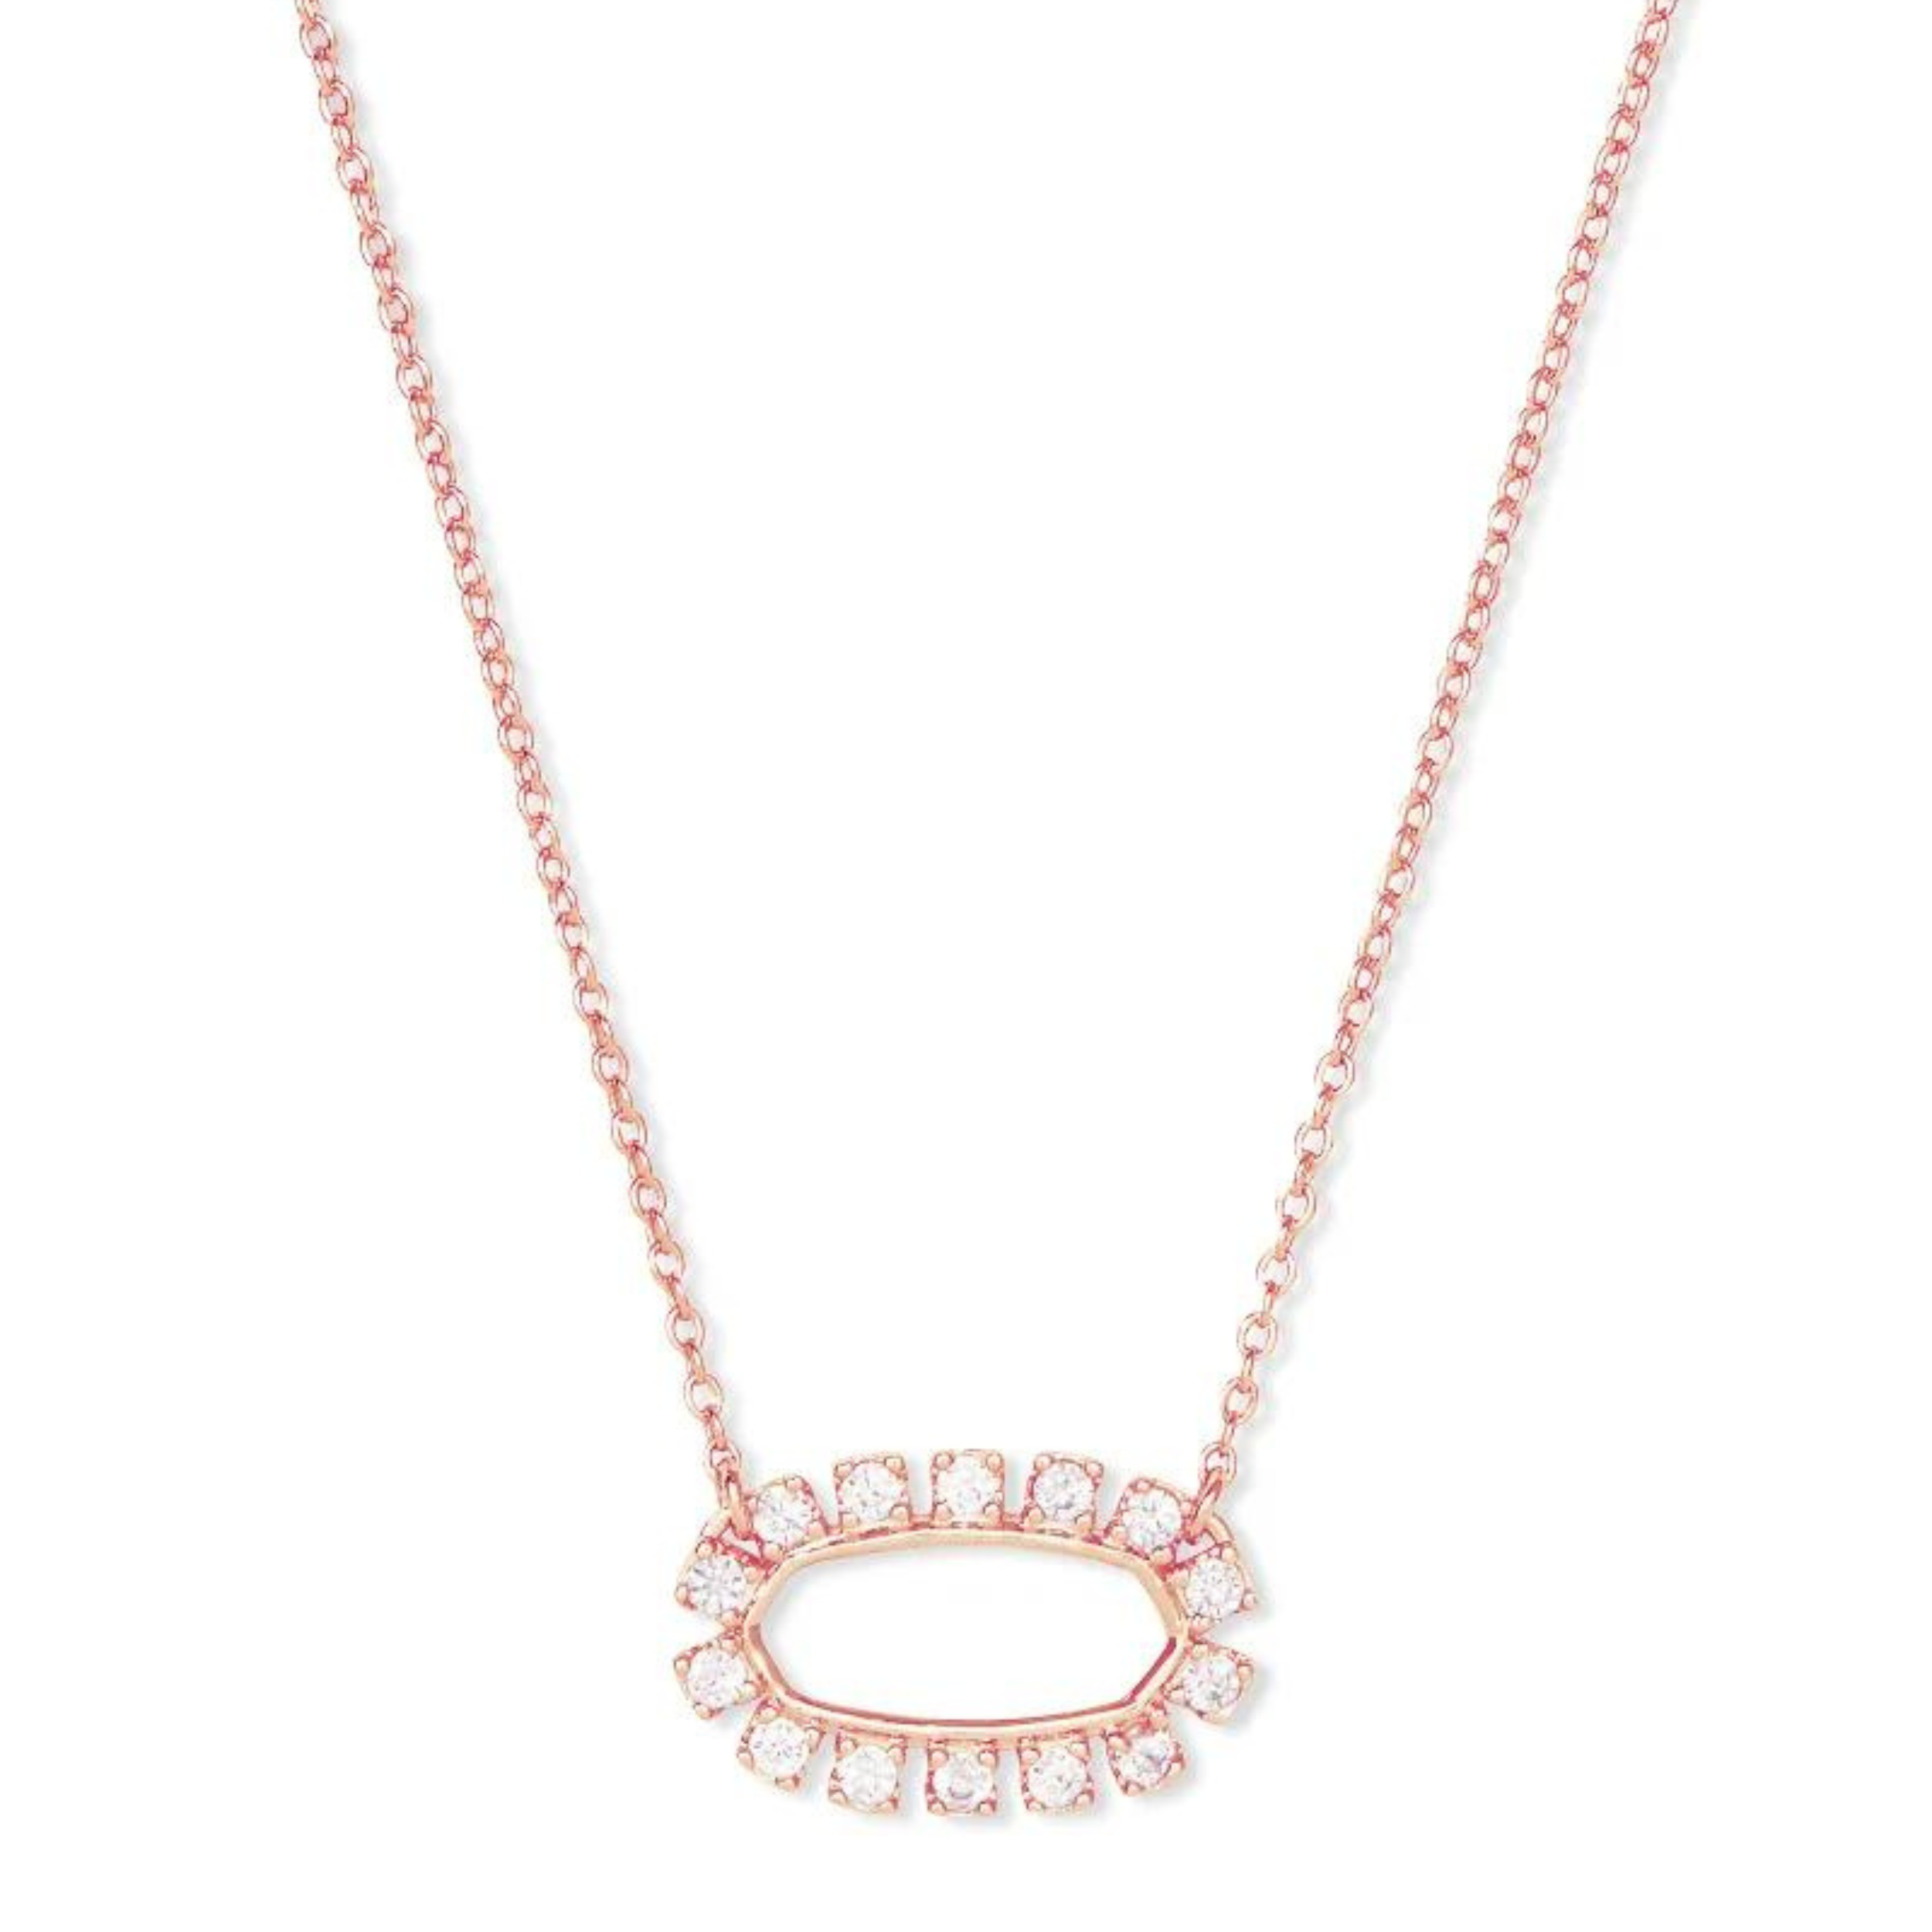 Rose gold open framed pendant necklace with white crystals, pictured on a white background.